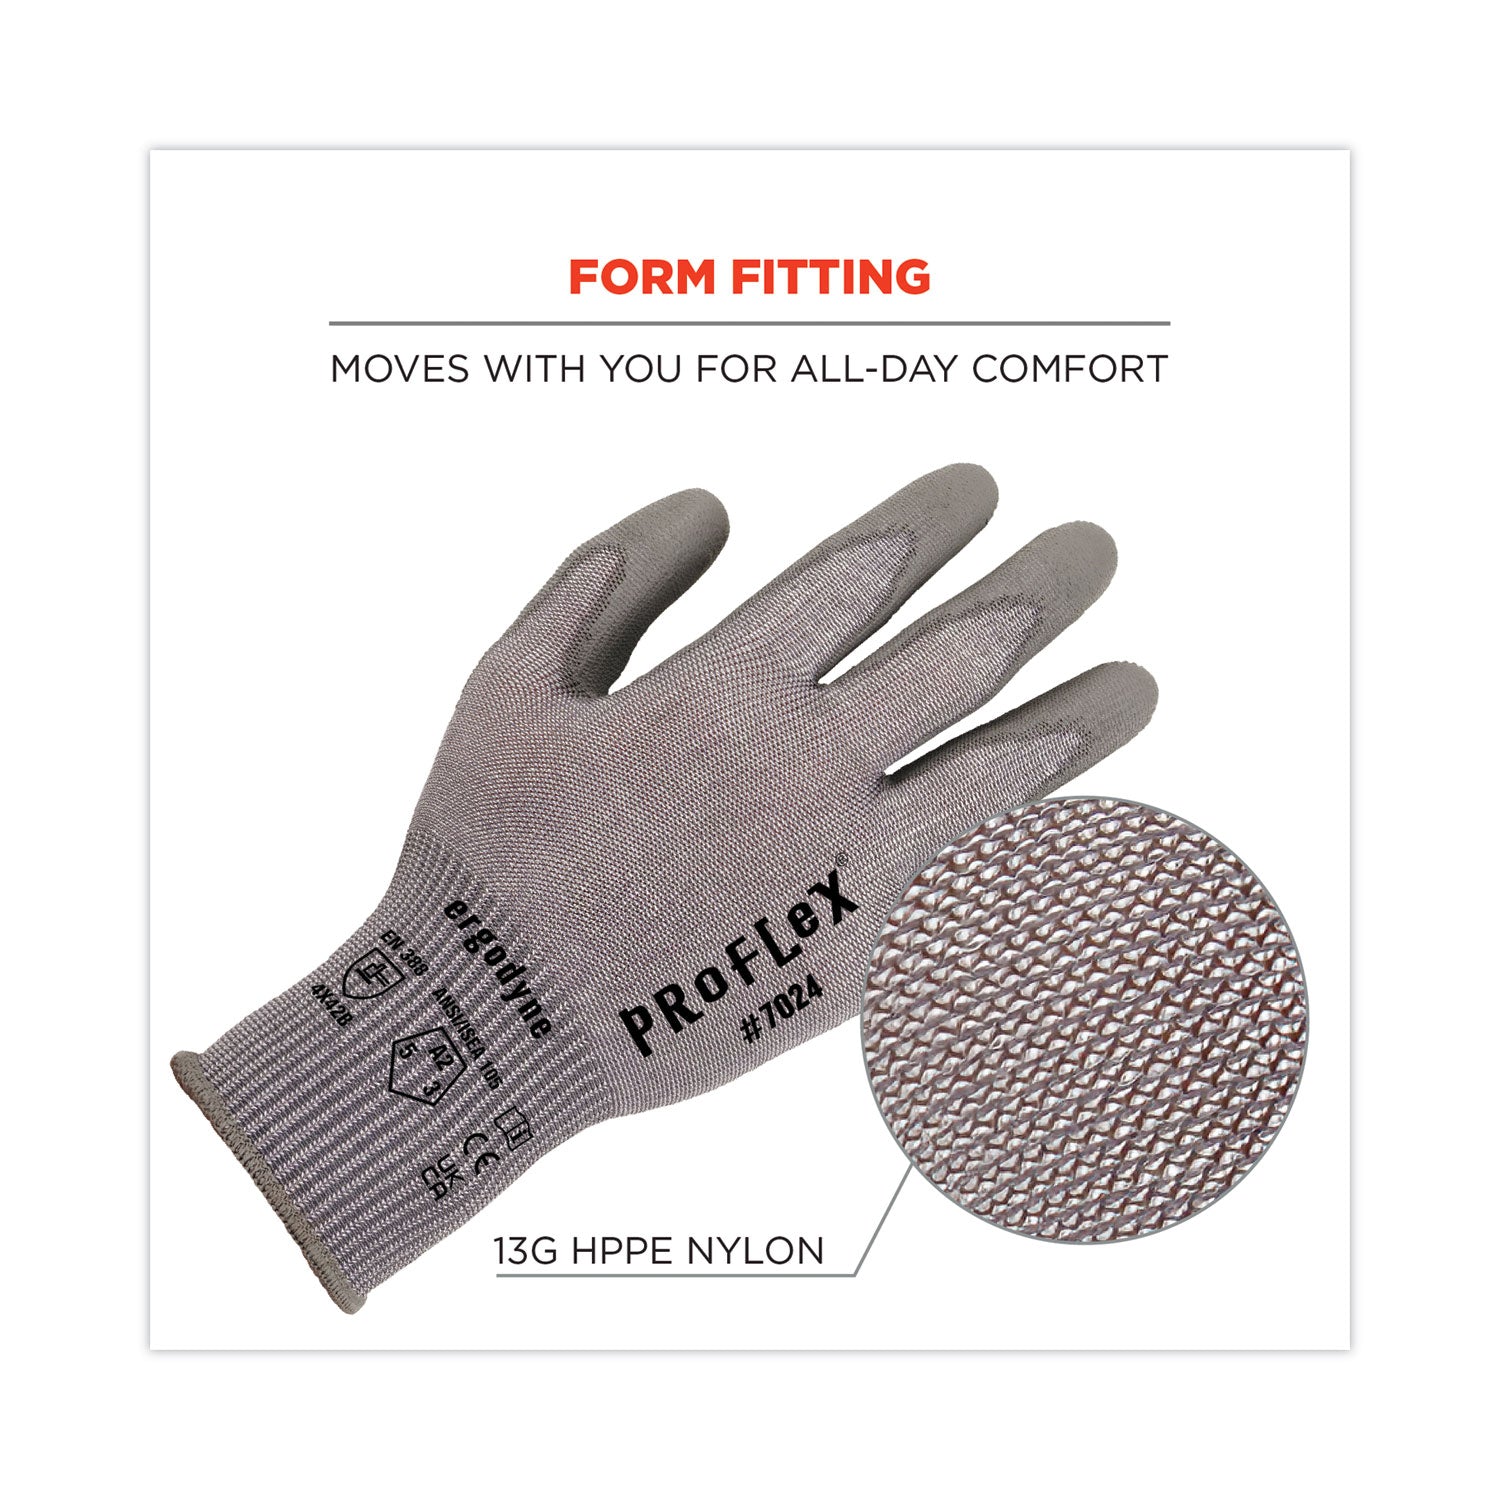 proflex-7024-ansi-a2-pu-coated-cr-gloves-gray-medium-pair-ships-in-1-3-business-days_ego10403 - 2